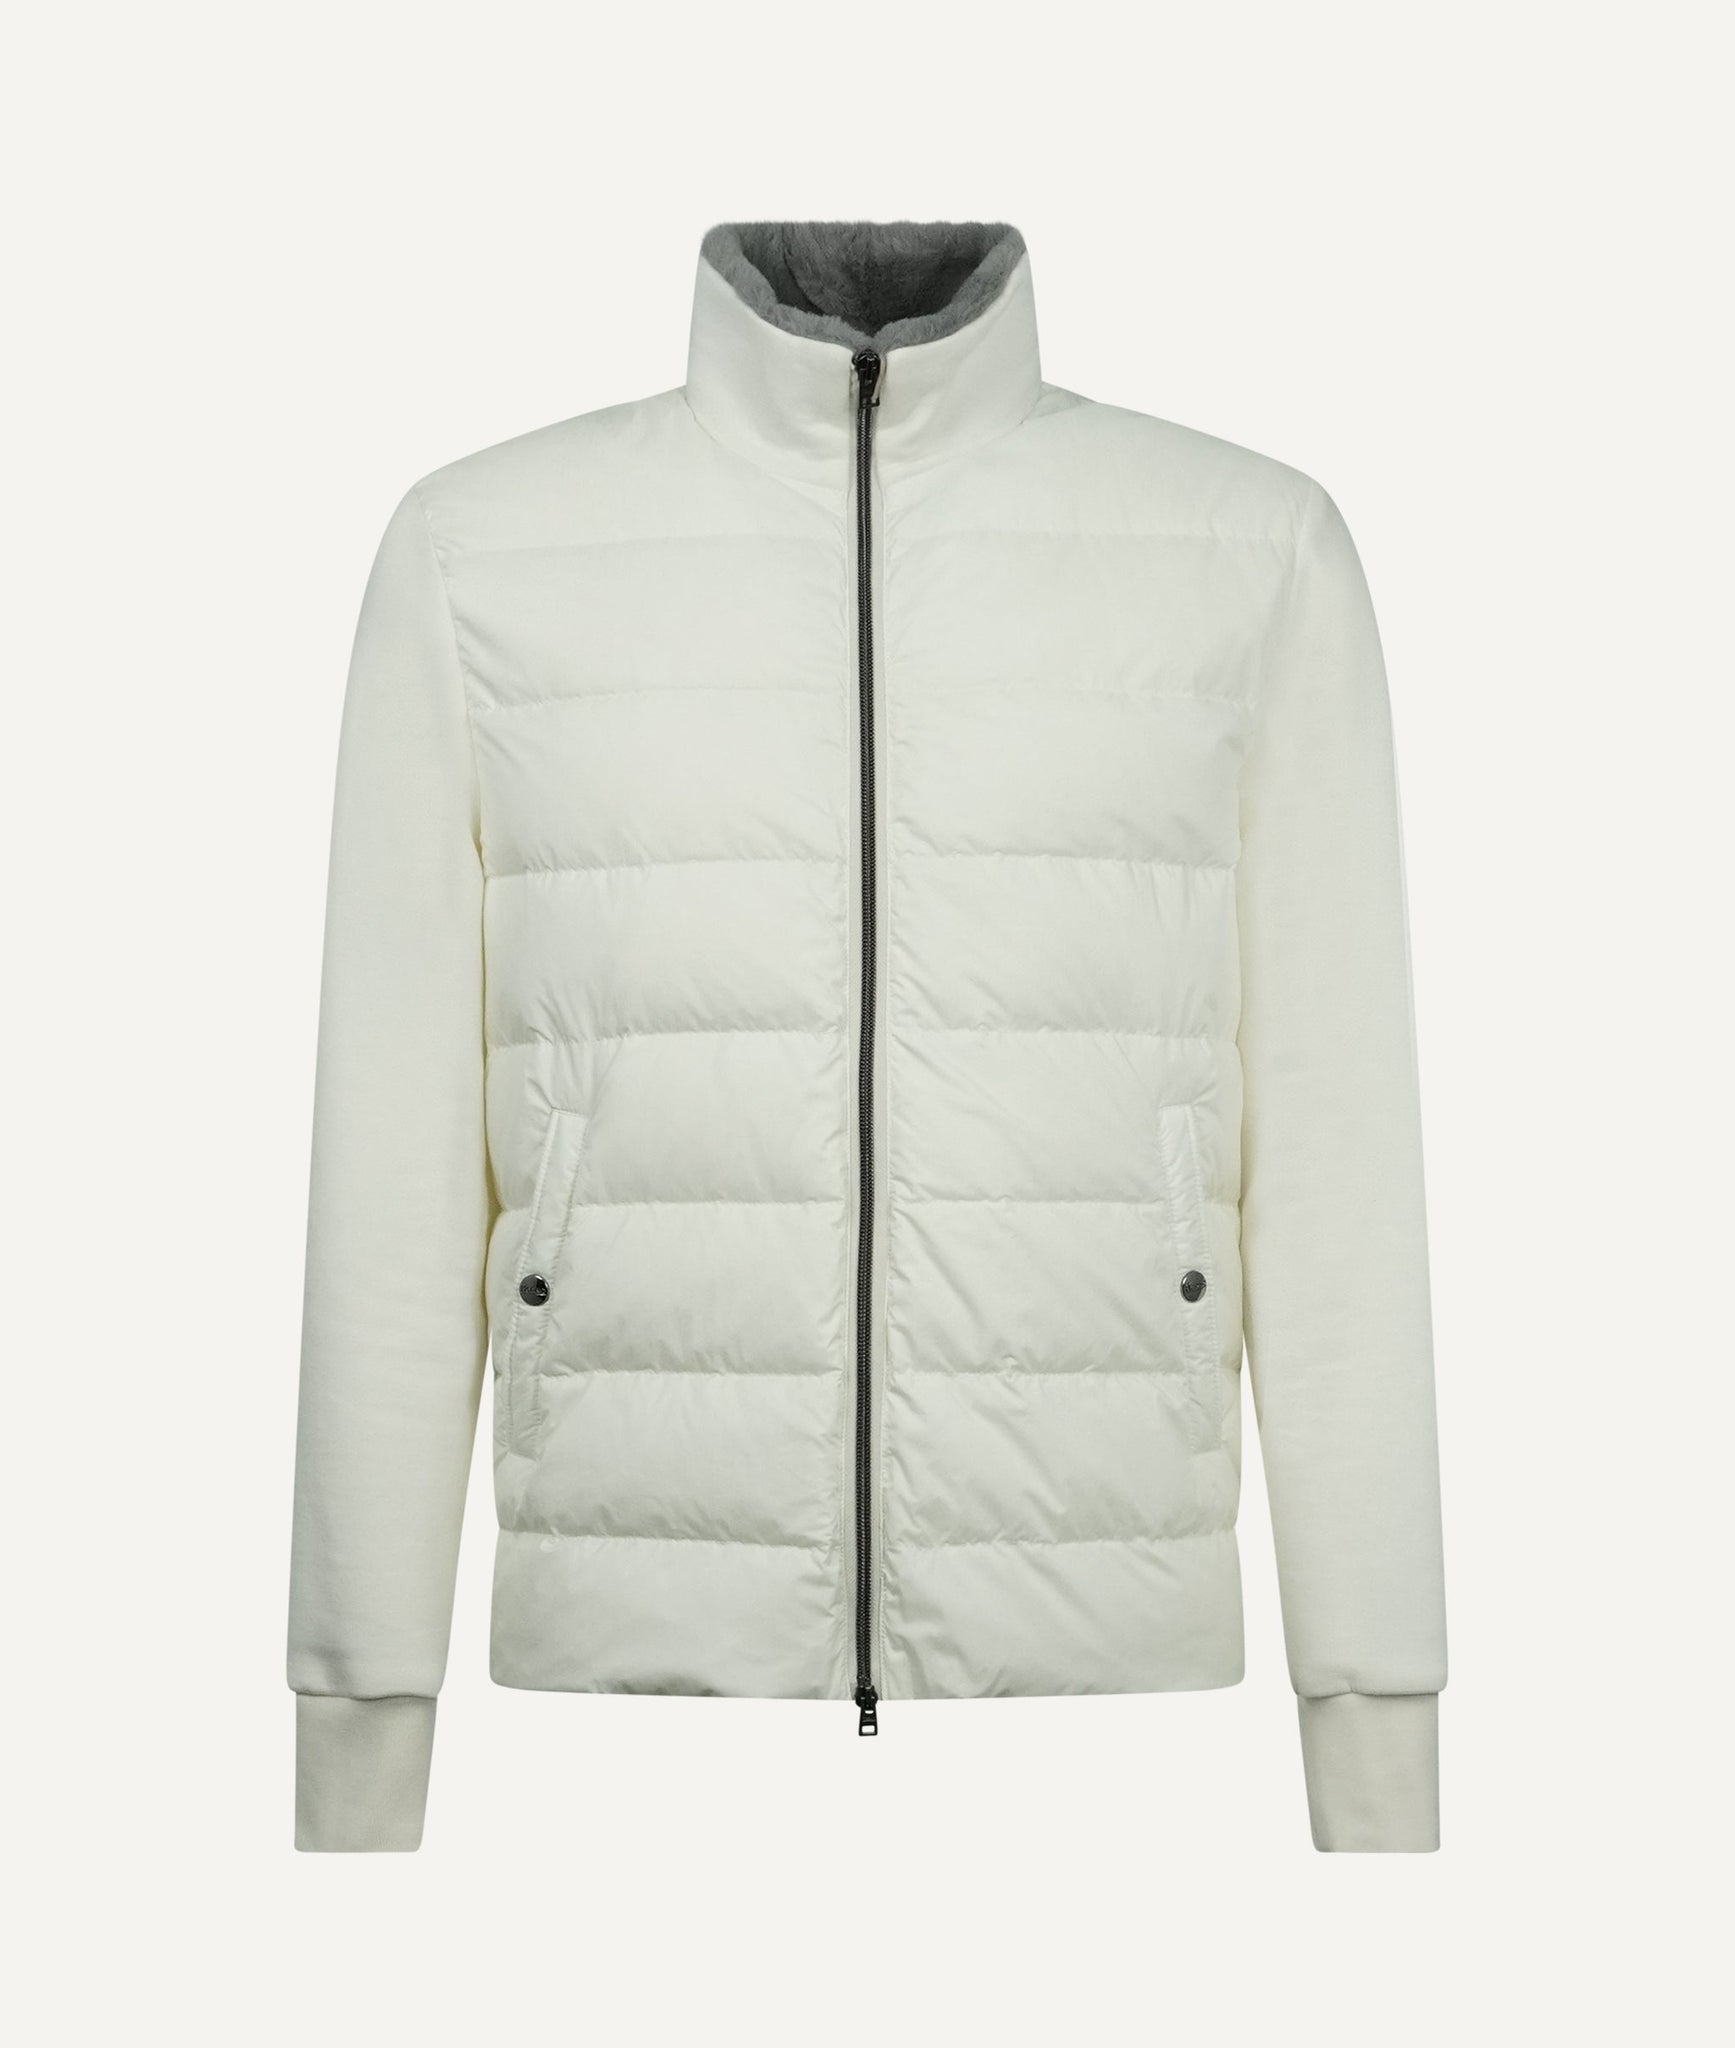 Herno - Down Jacket in Polyester